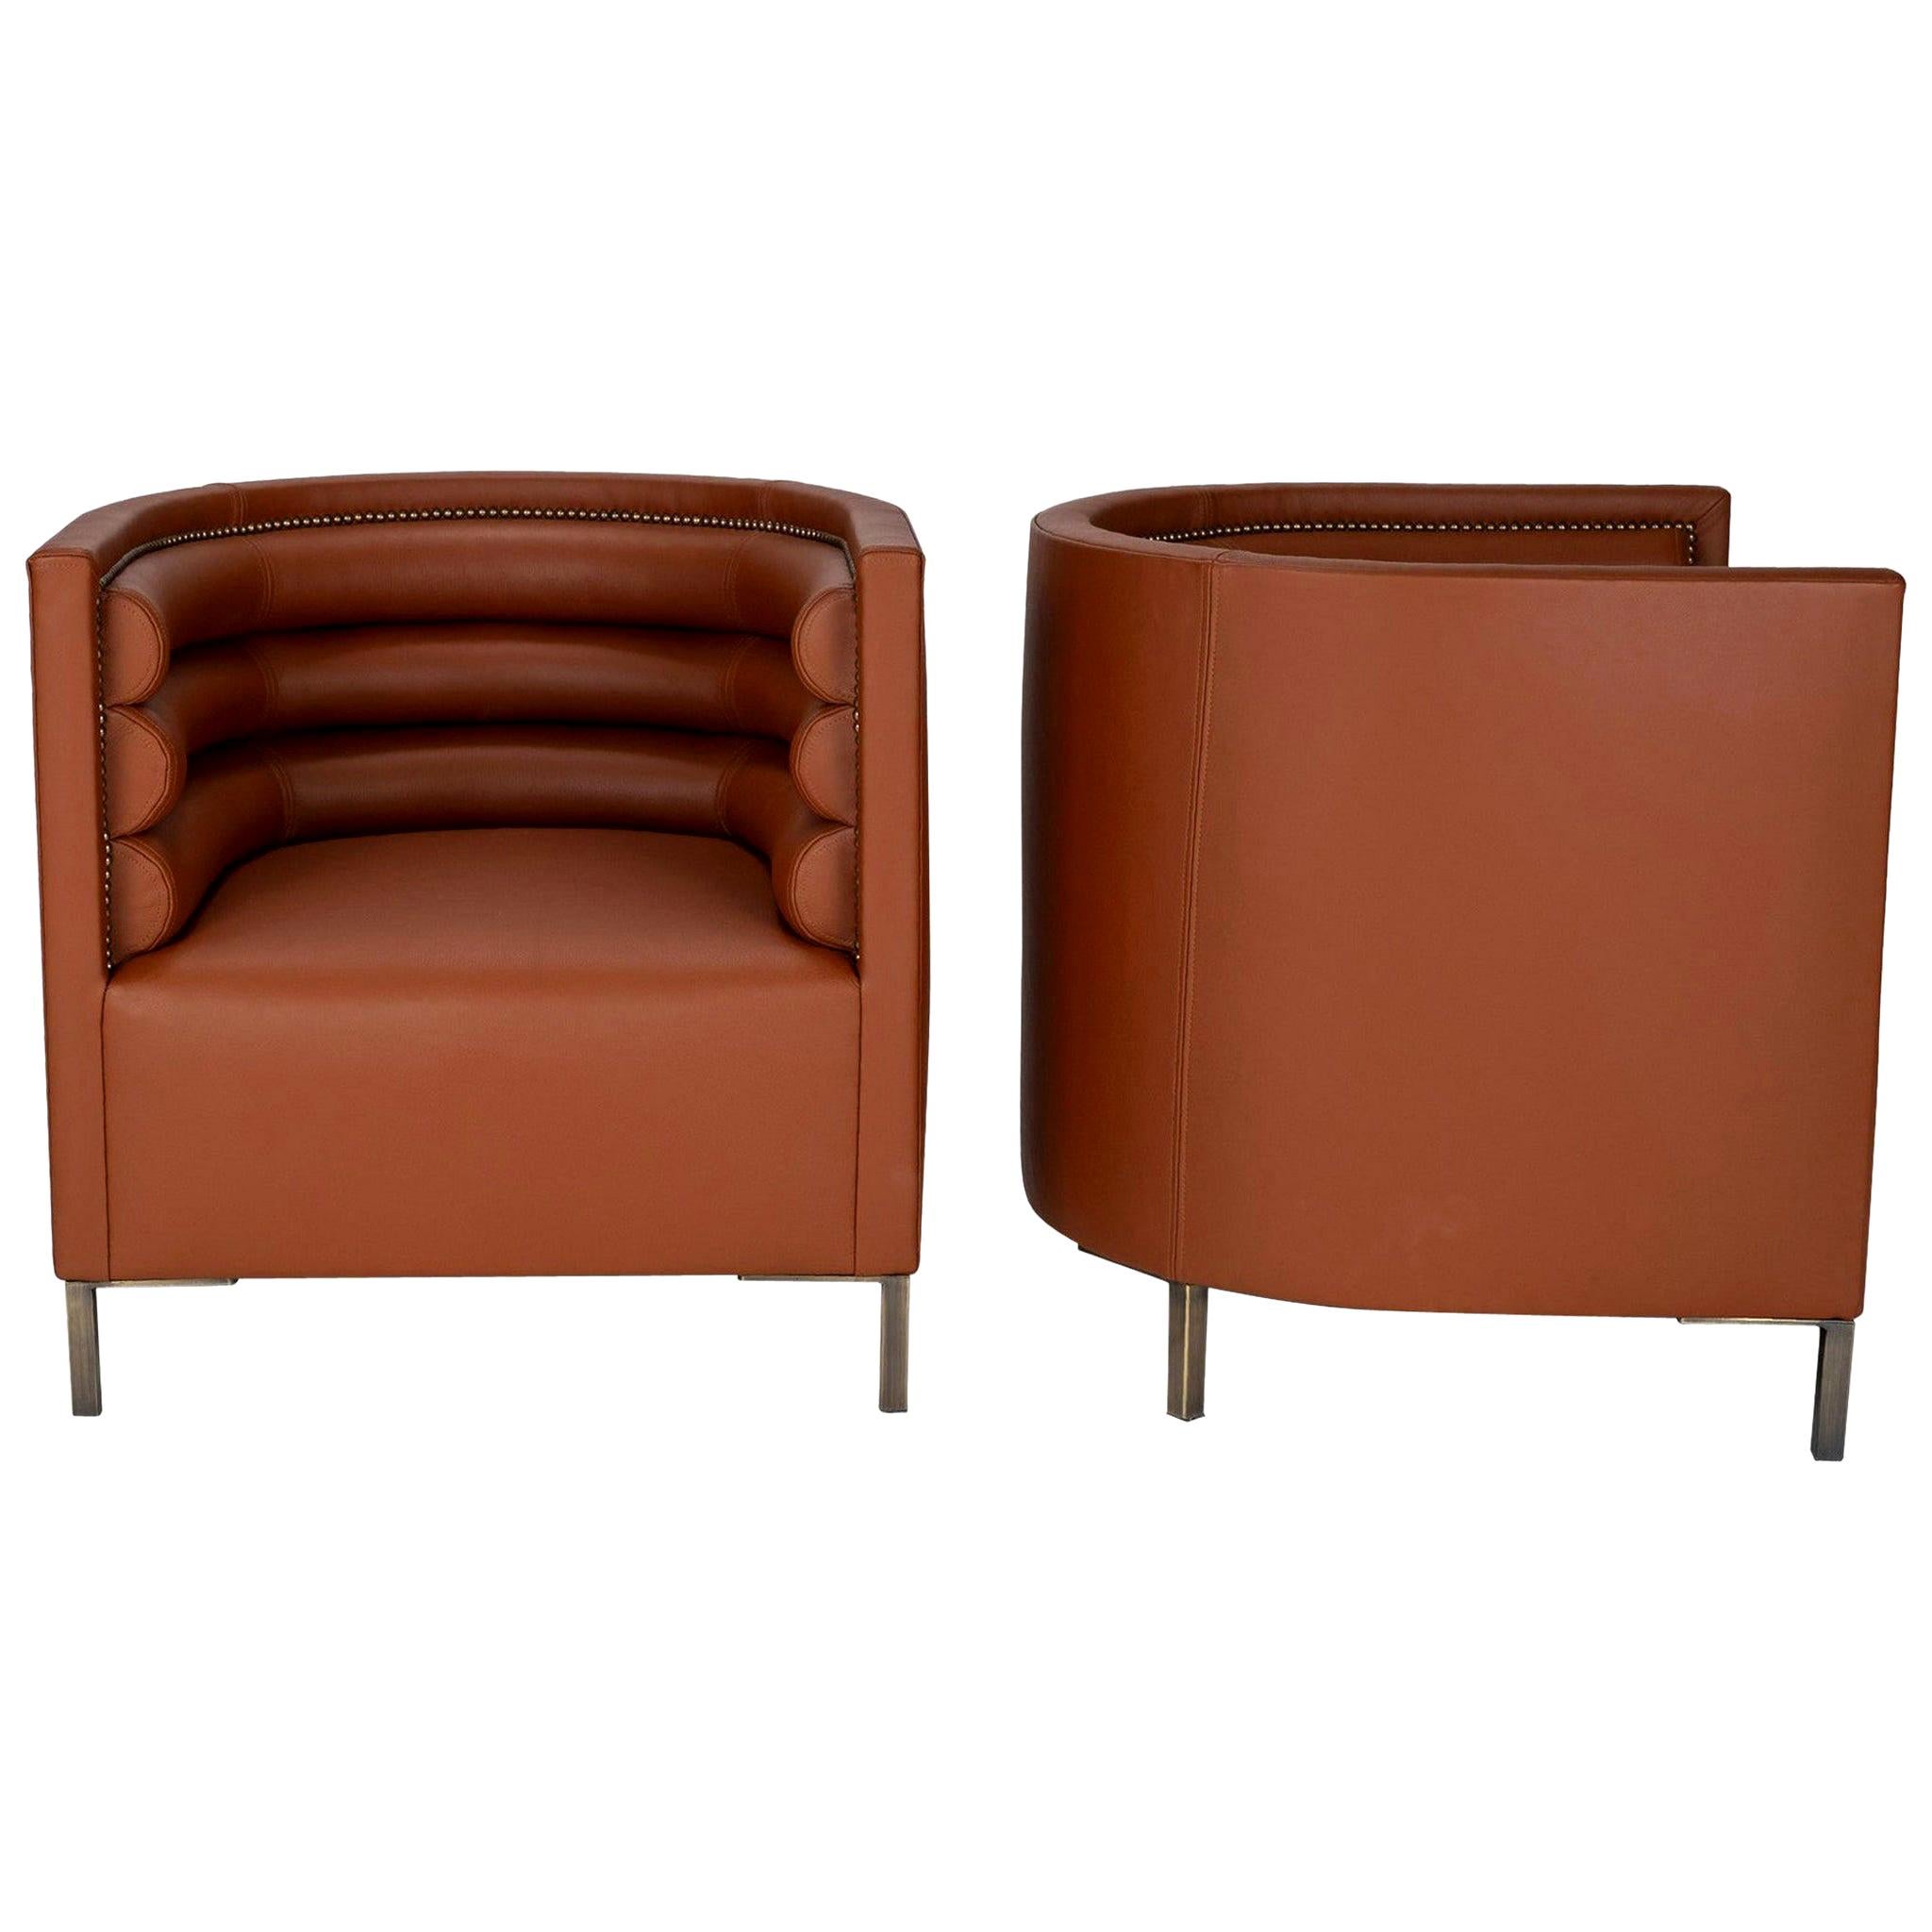 Pair of 20th Century Italian Barrel Back Chairs in Cognac Leather